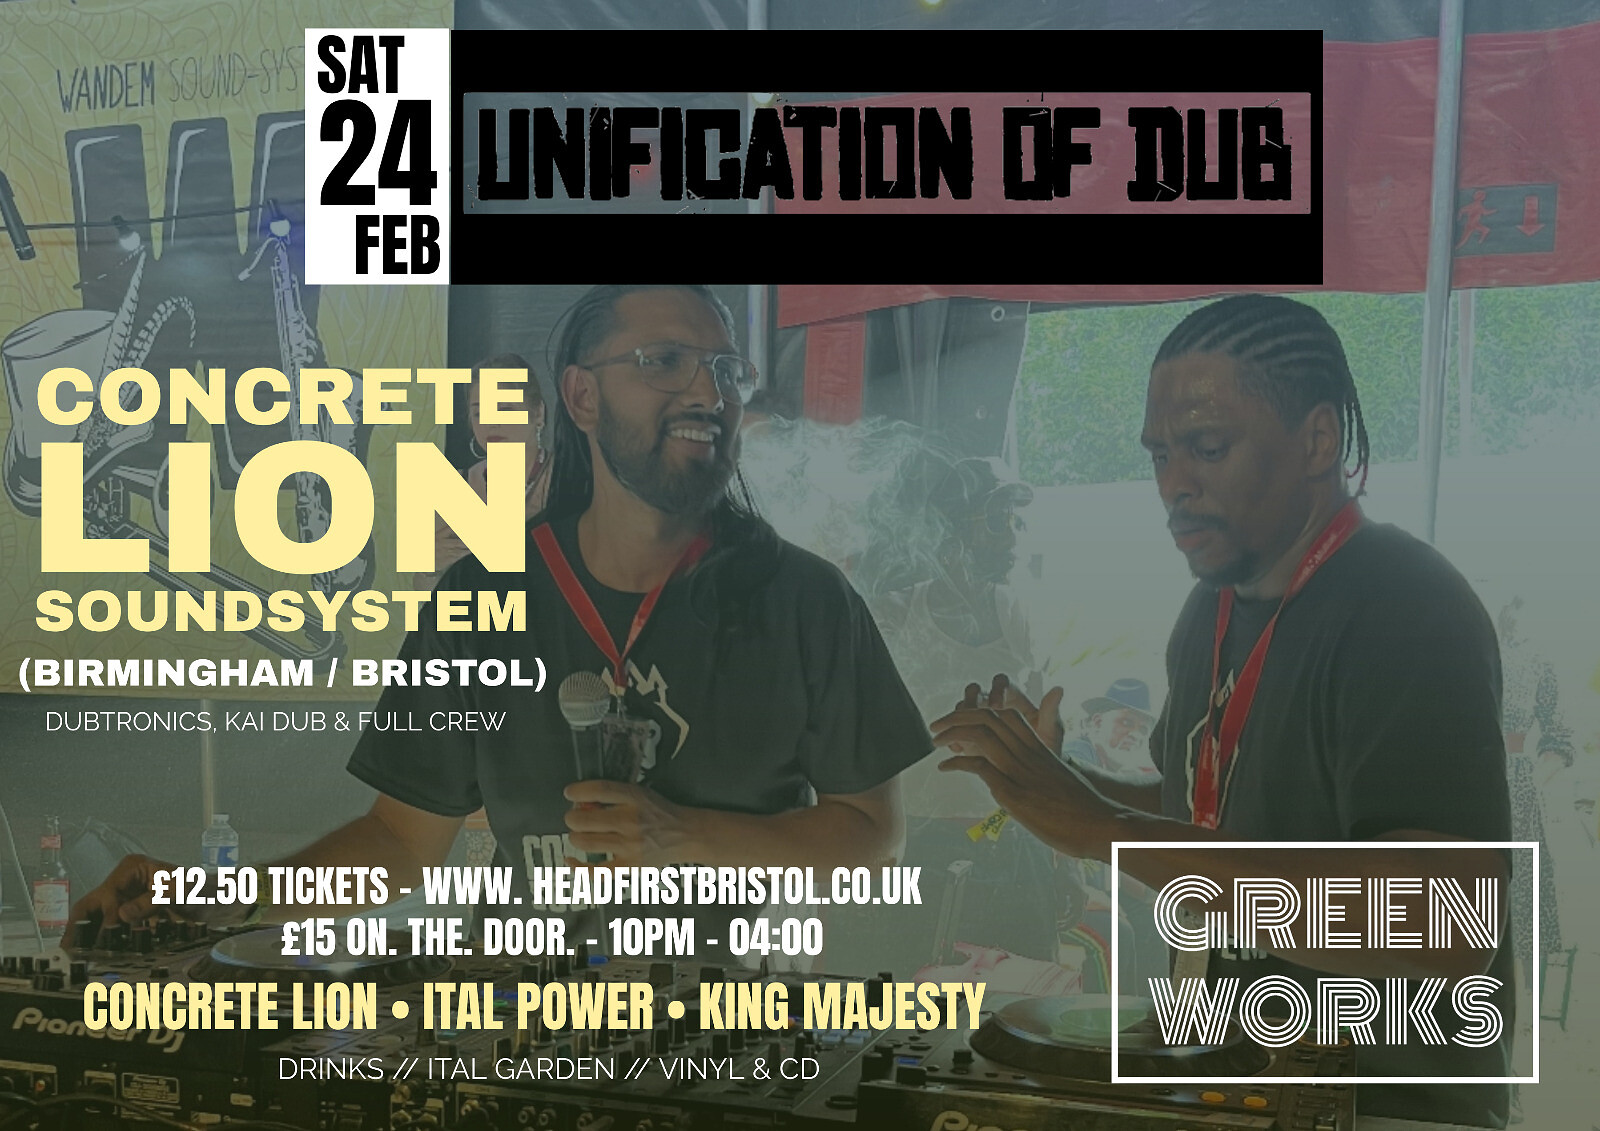 Unification Of Dub at Green Works